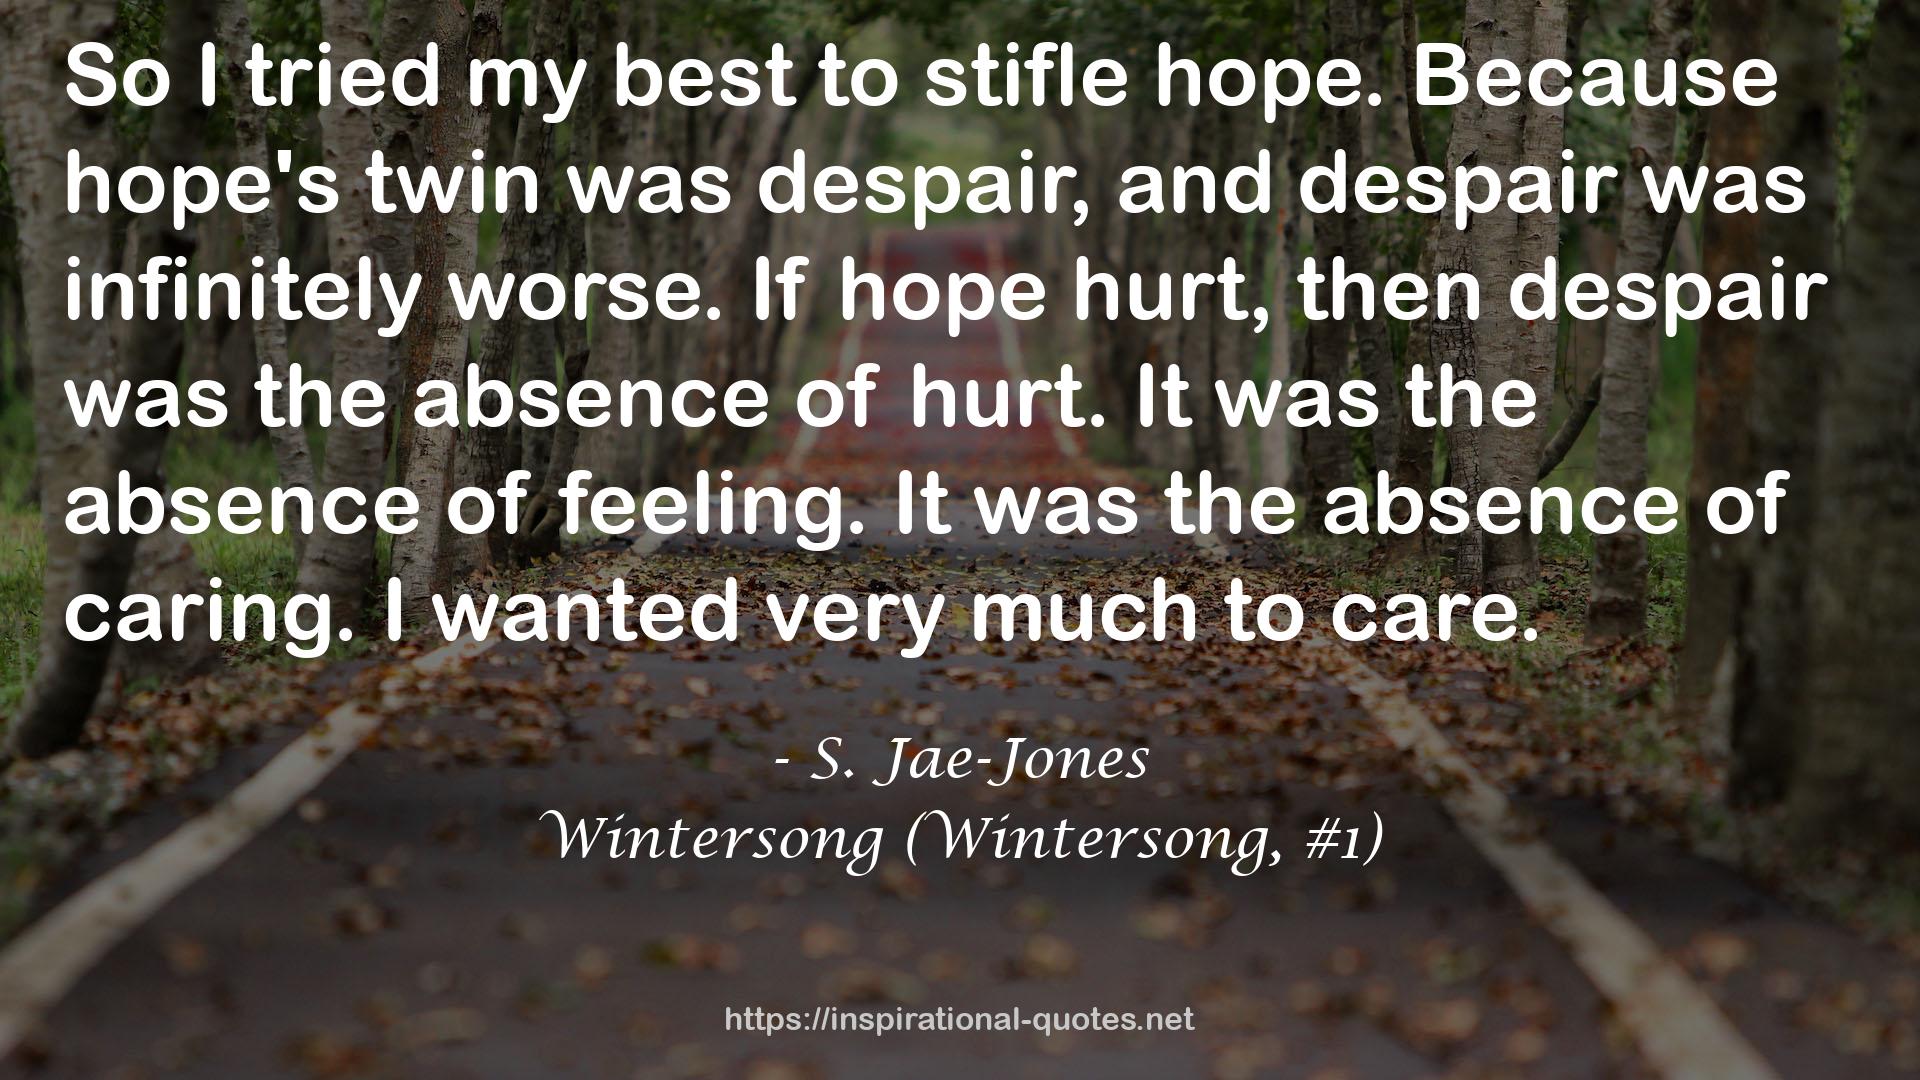 Wintersong (Wintersong, #1) QUOTES